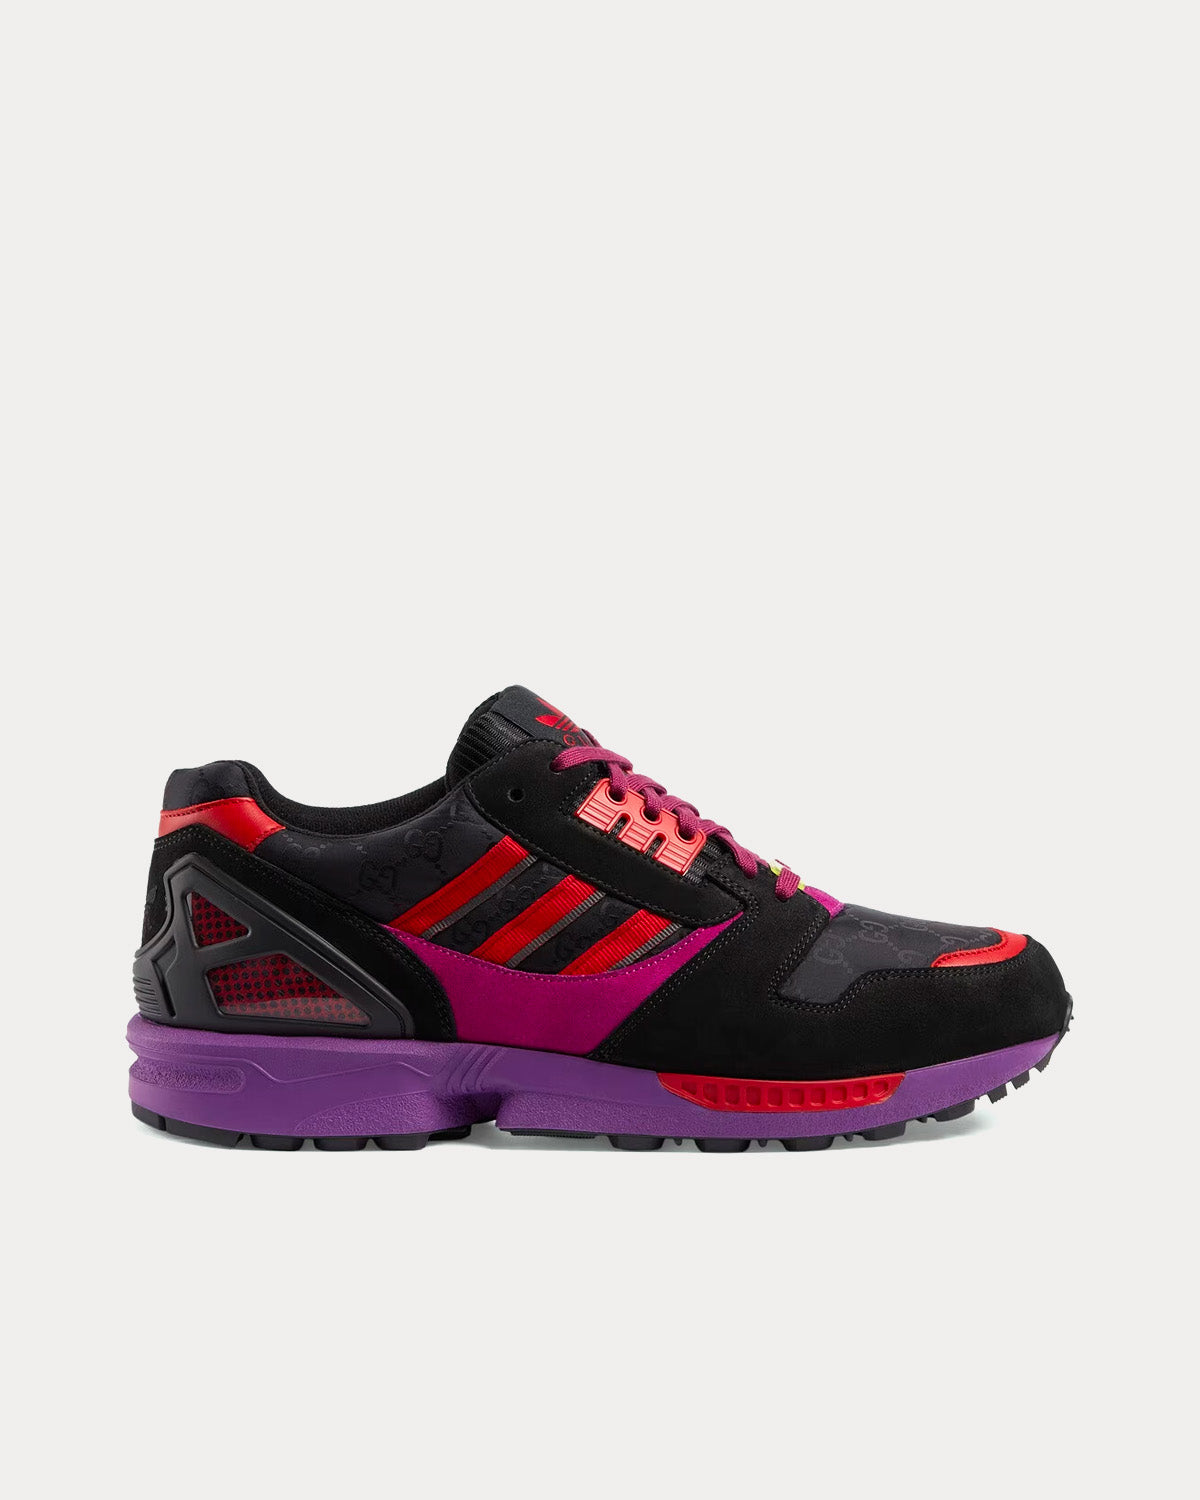 Adidas x Gucci - ZX8000 GG Canvas Black / Purple Low Top Sneakers